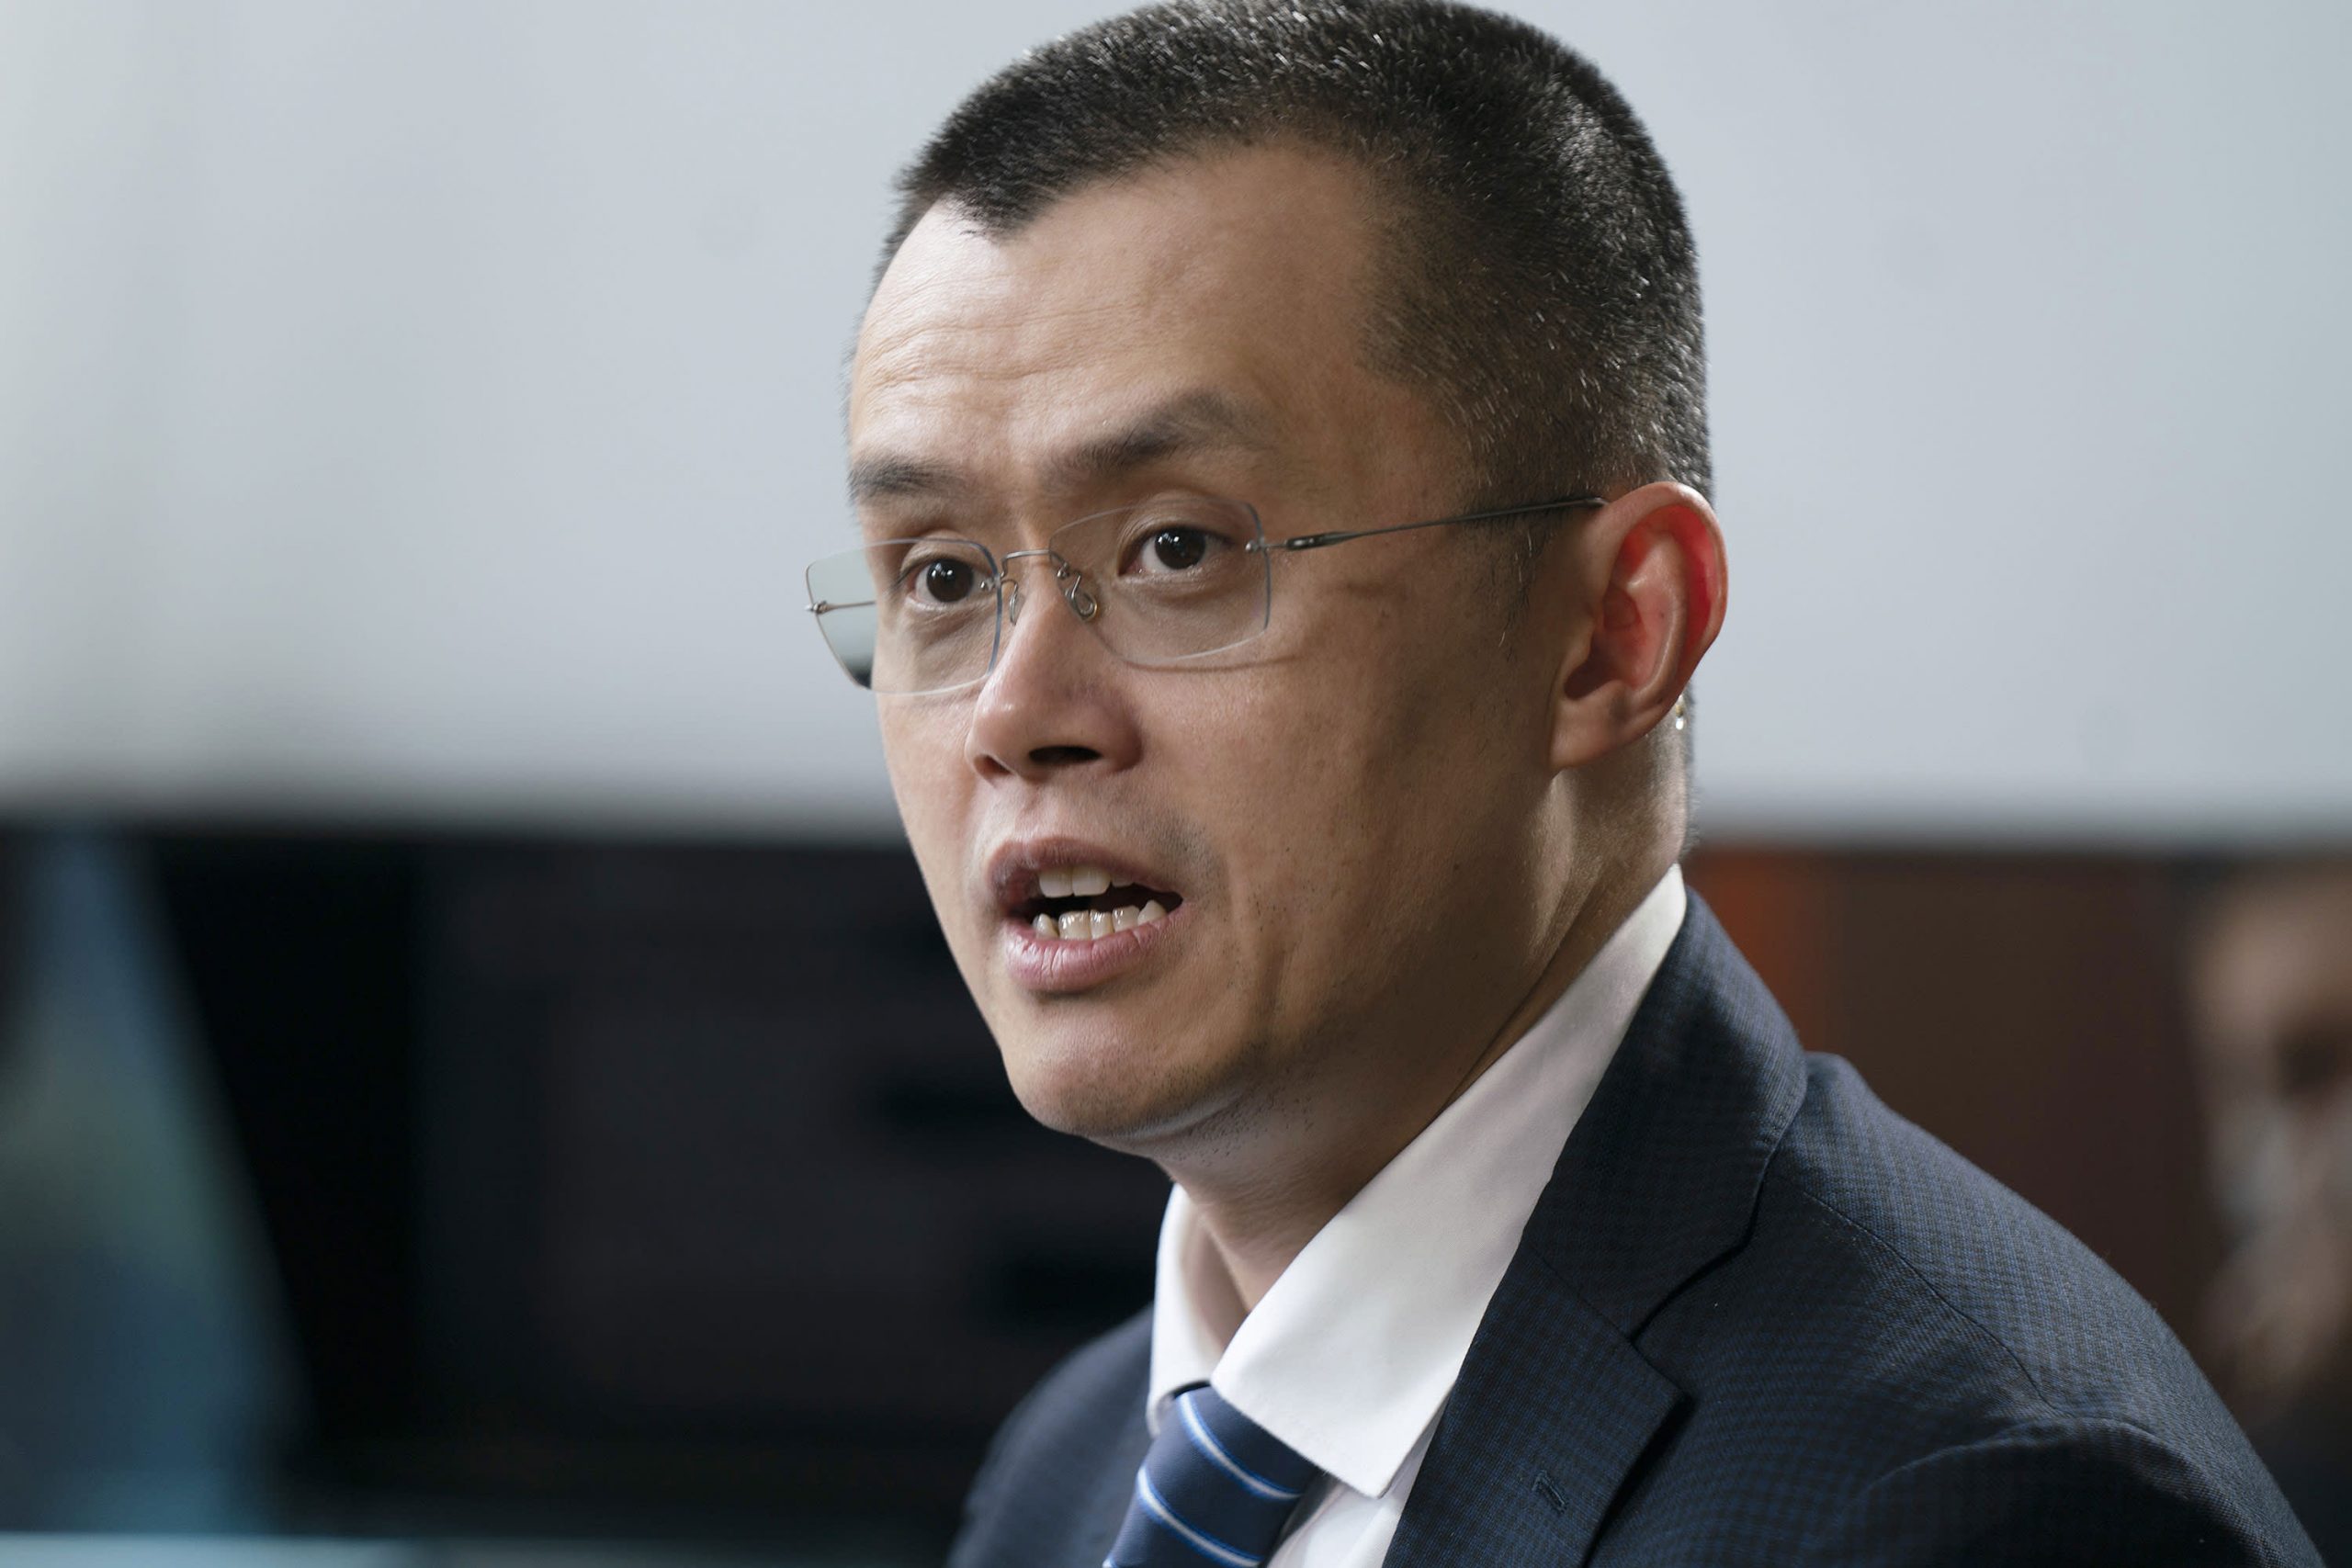 Binance, led by the world’s richest crypto billionaire, is taking a $200 million stake in Forbes